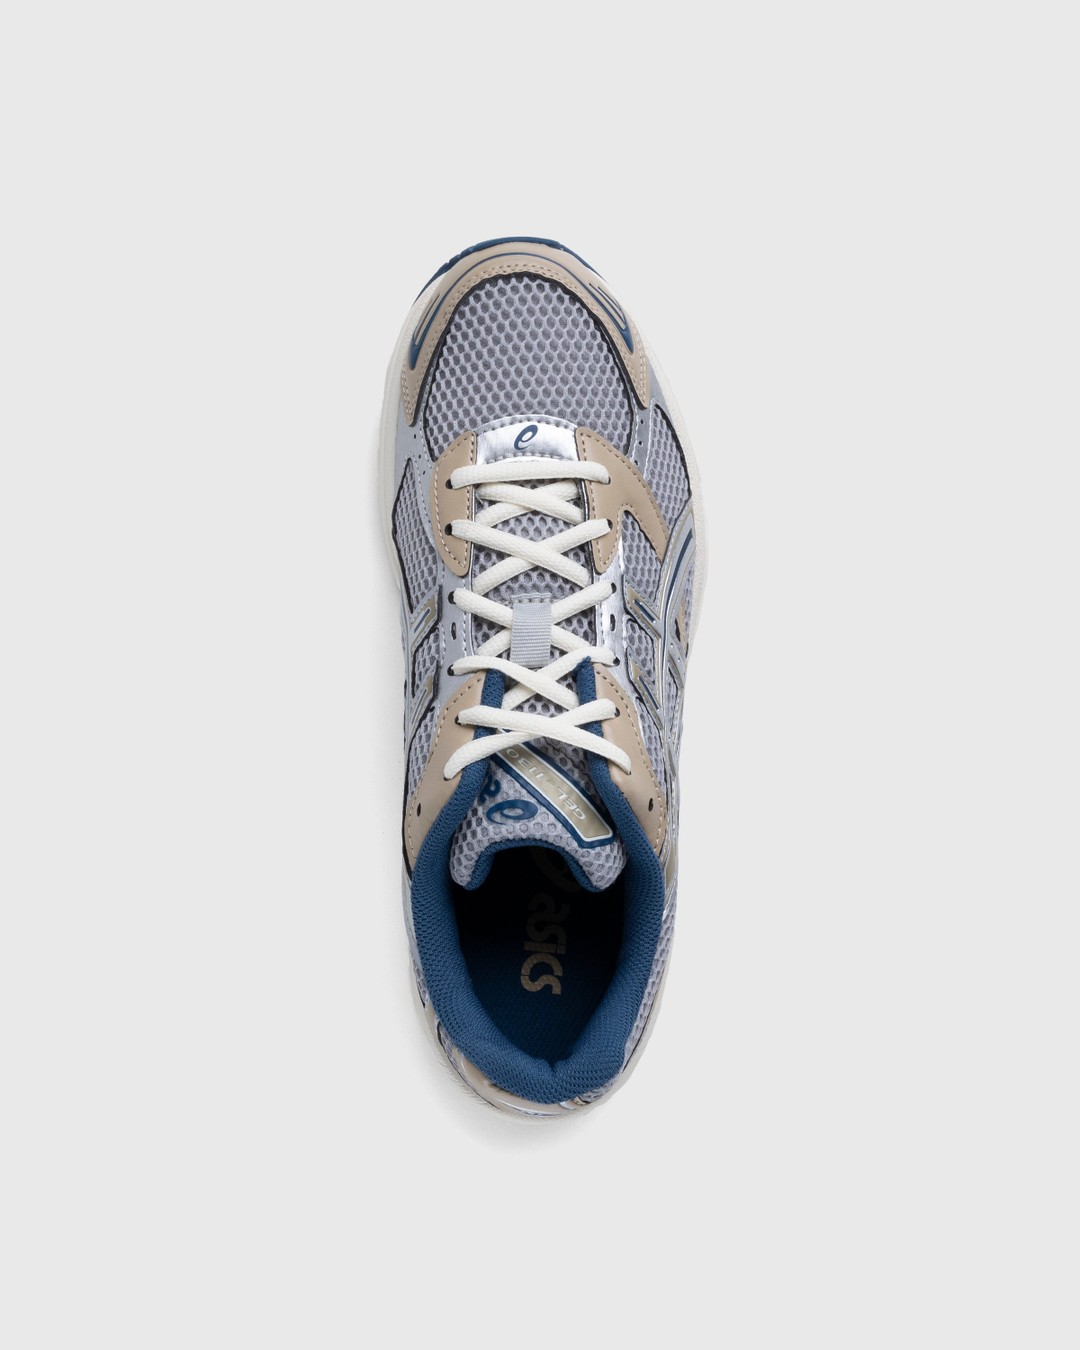 asics – Gel-1130 Oyster Grey Pure Silver - Low Top Sneakers - Beige - Image 3